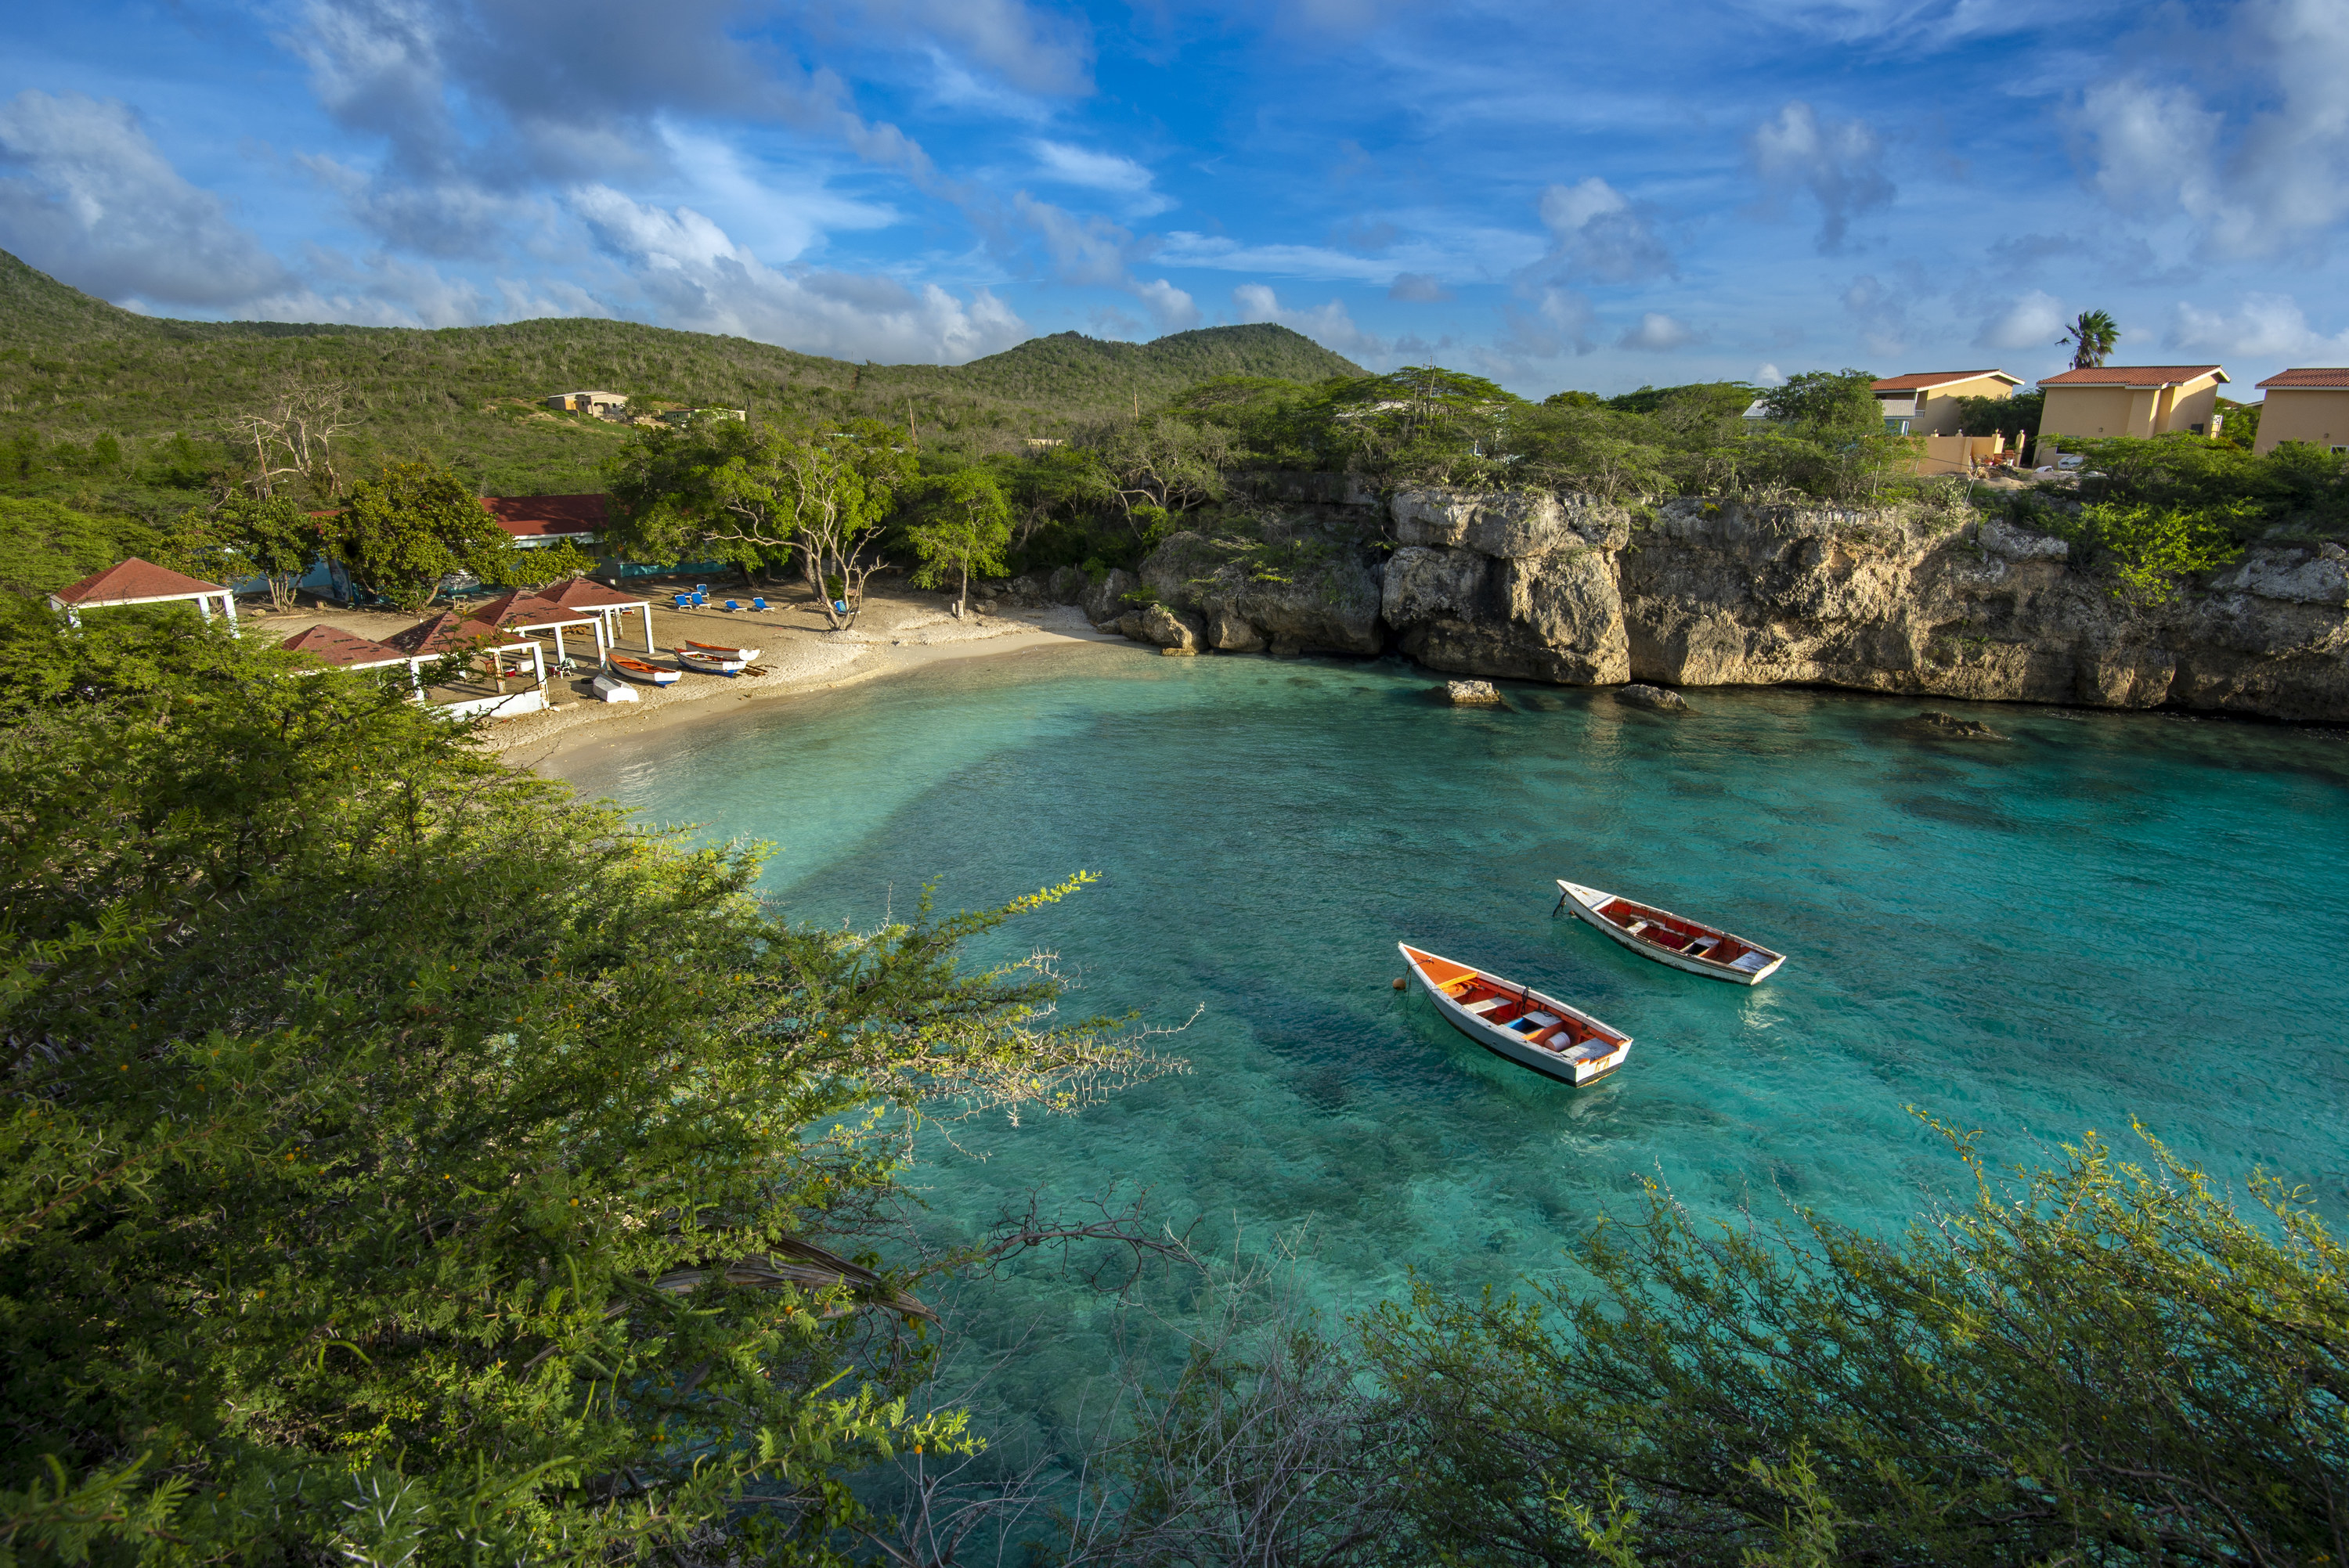 Two wooden fishing boats on the crystal clear turquoise waters at Lagoon on Curacao.